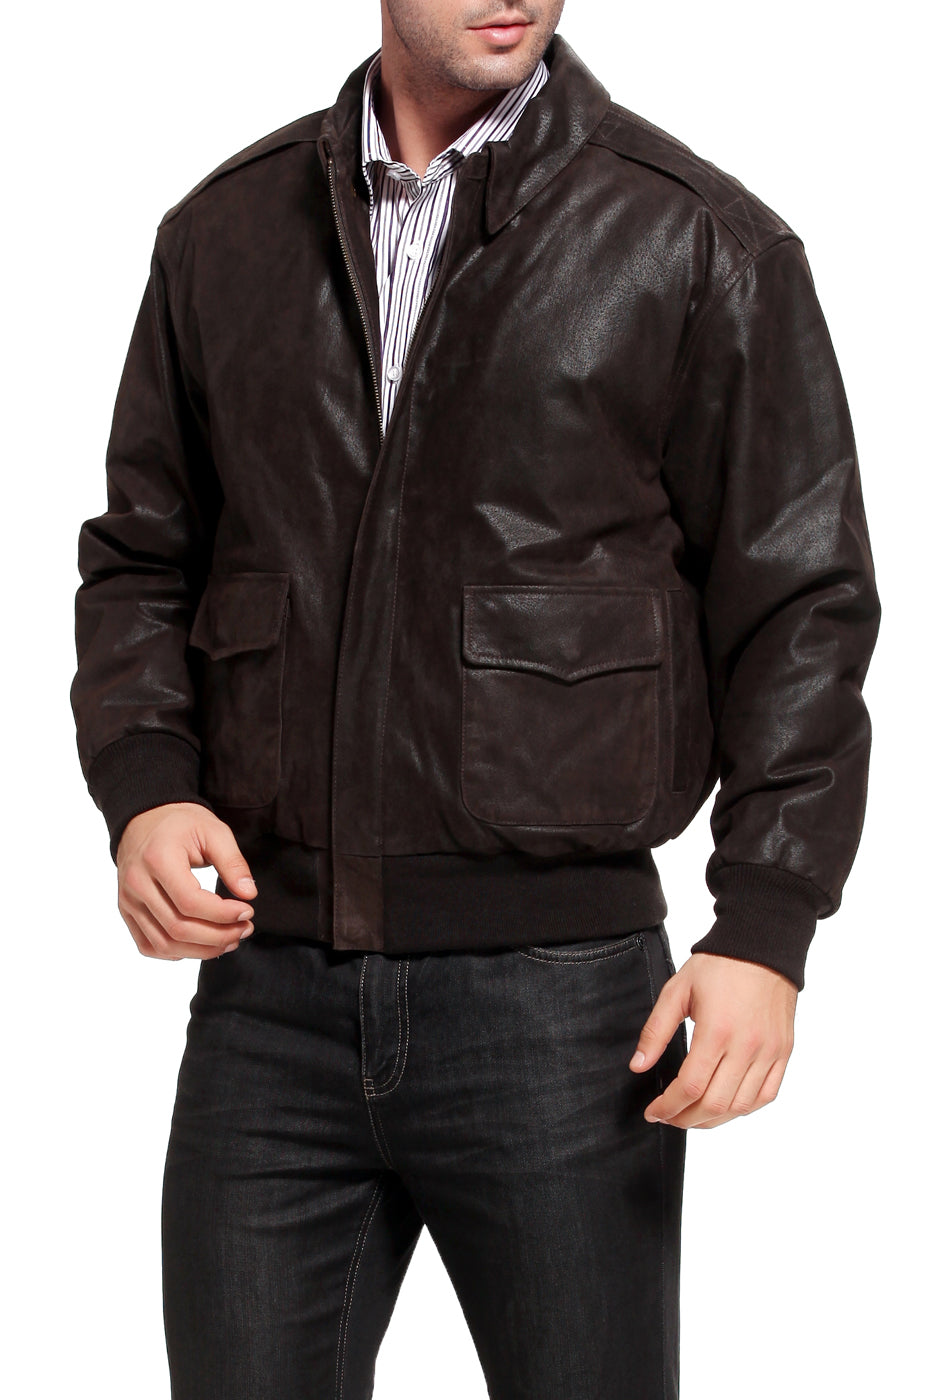 Aviator Men A2 Distressed Brown Real Leather Bomber Flight Jacket